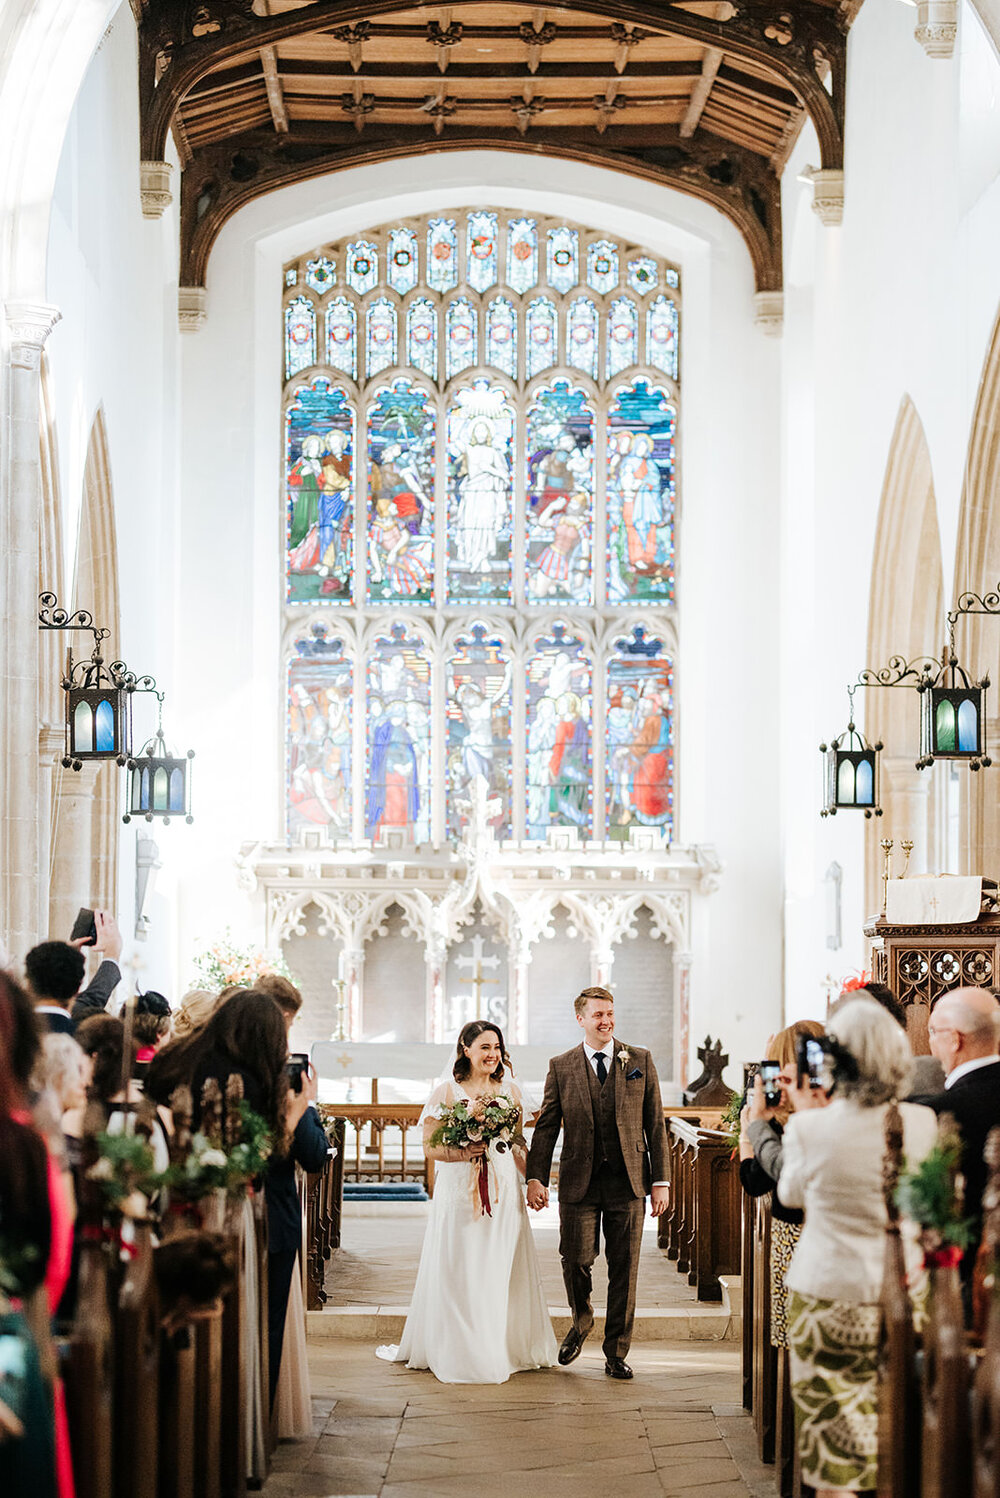 Bride and groom walk back down the aisle as married couple in opulent church with stained glass in the background